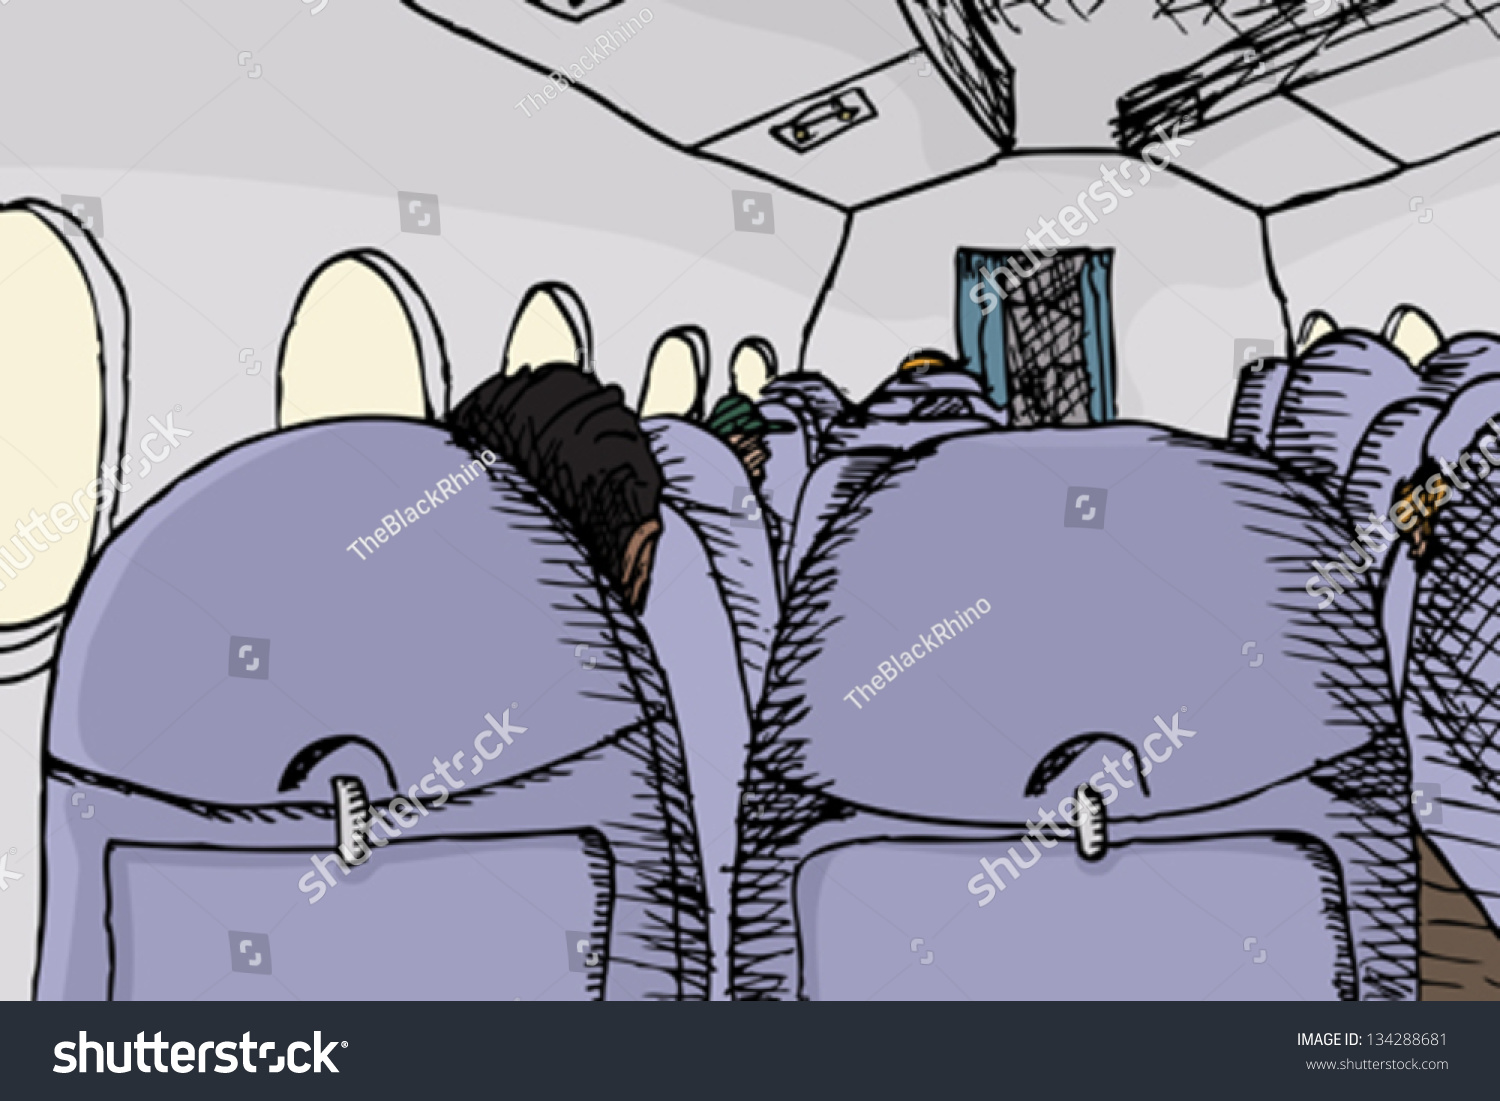 airplane seat clipart - photo #33